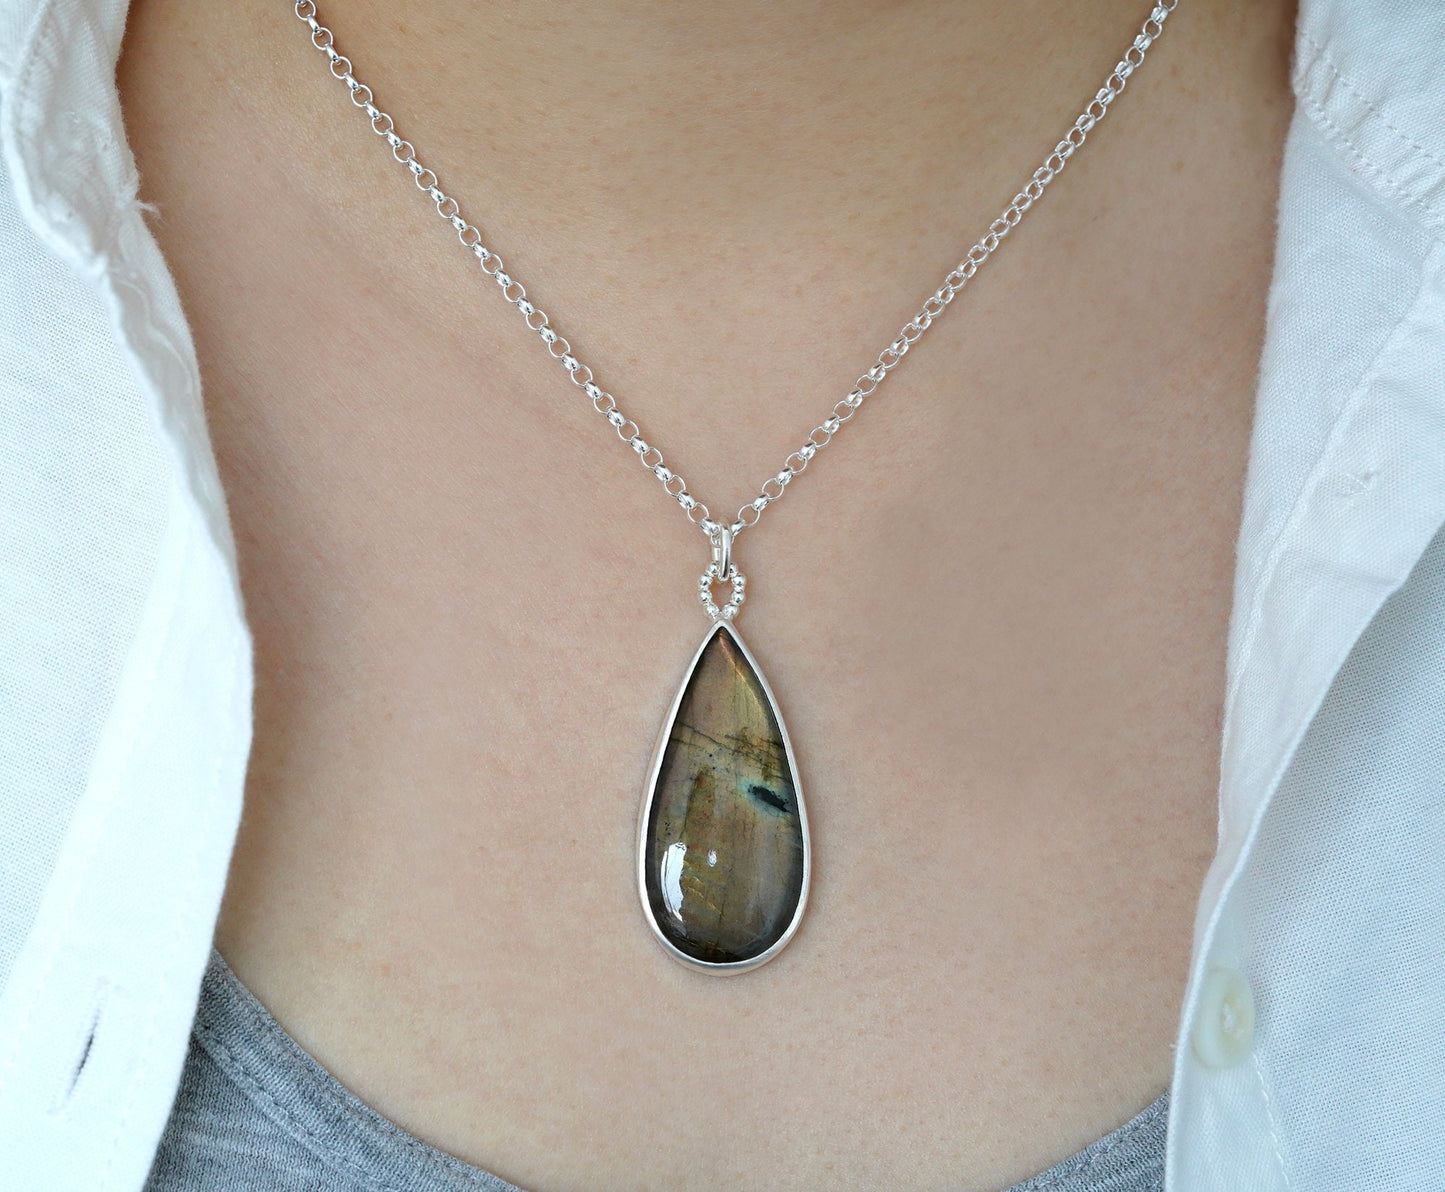 Large Labradorite Necklace in Recycled Sterling Silver, Peacock Feather Coloured Labradorite Statement Necklace